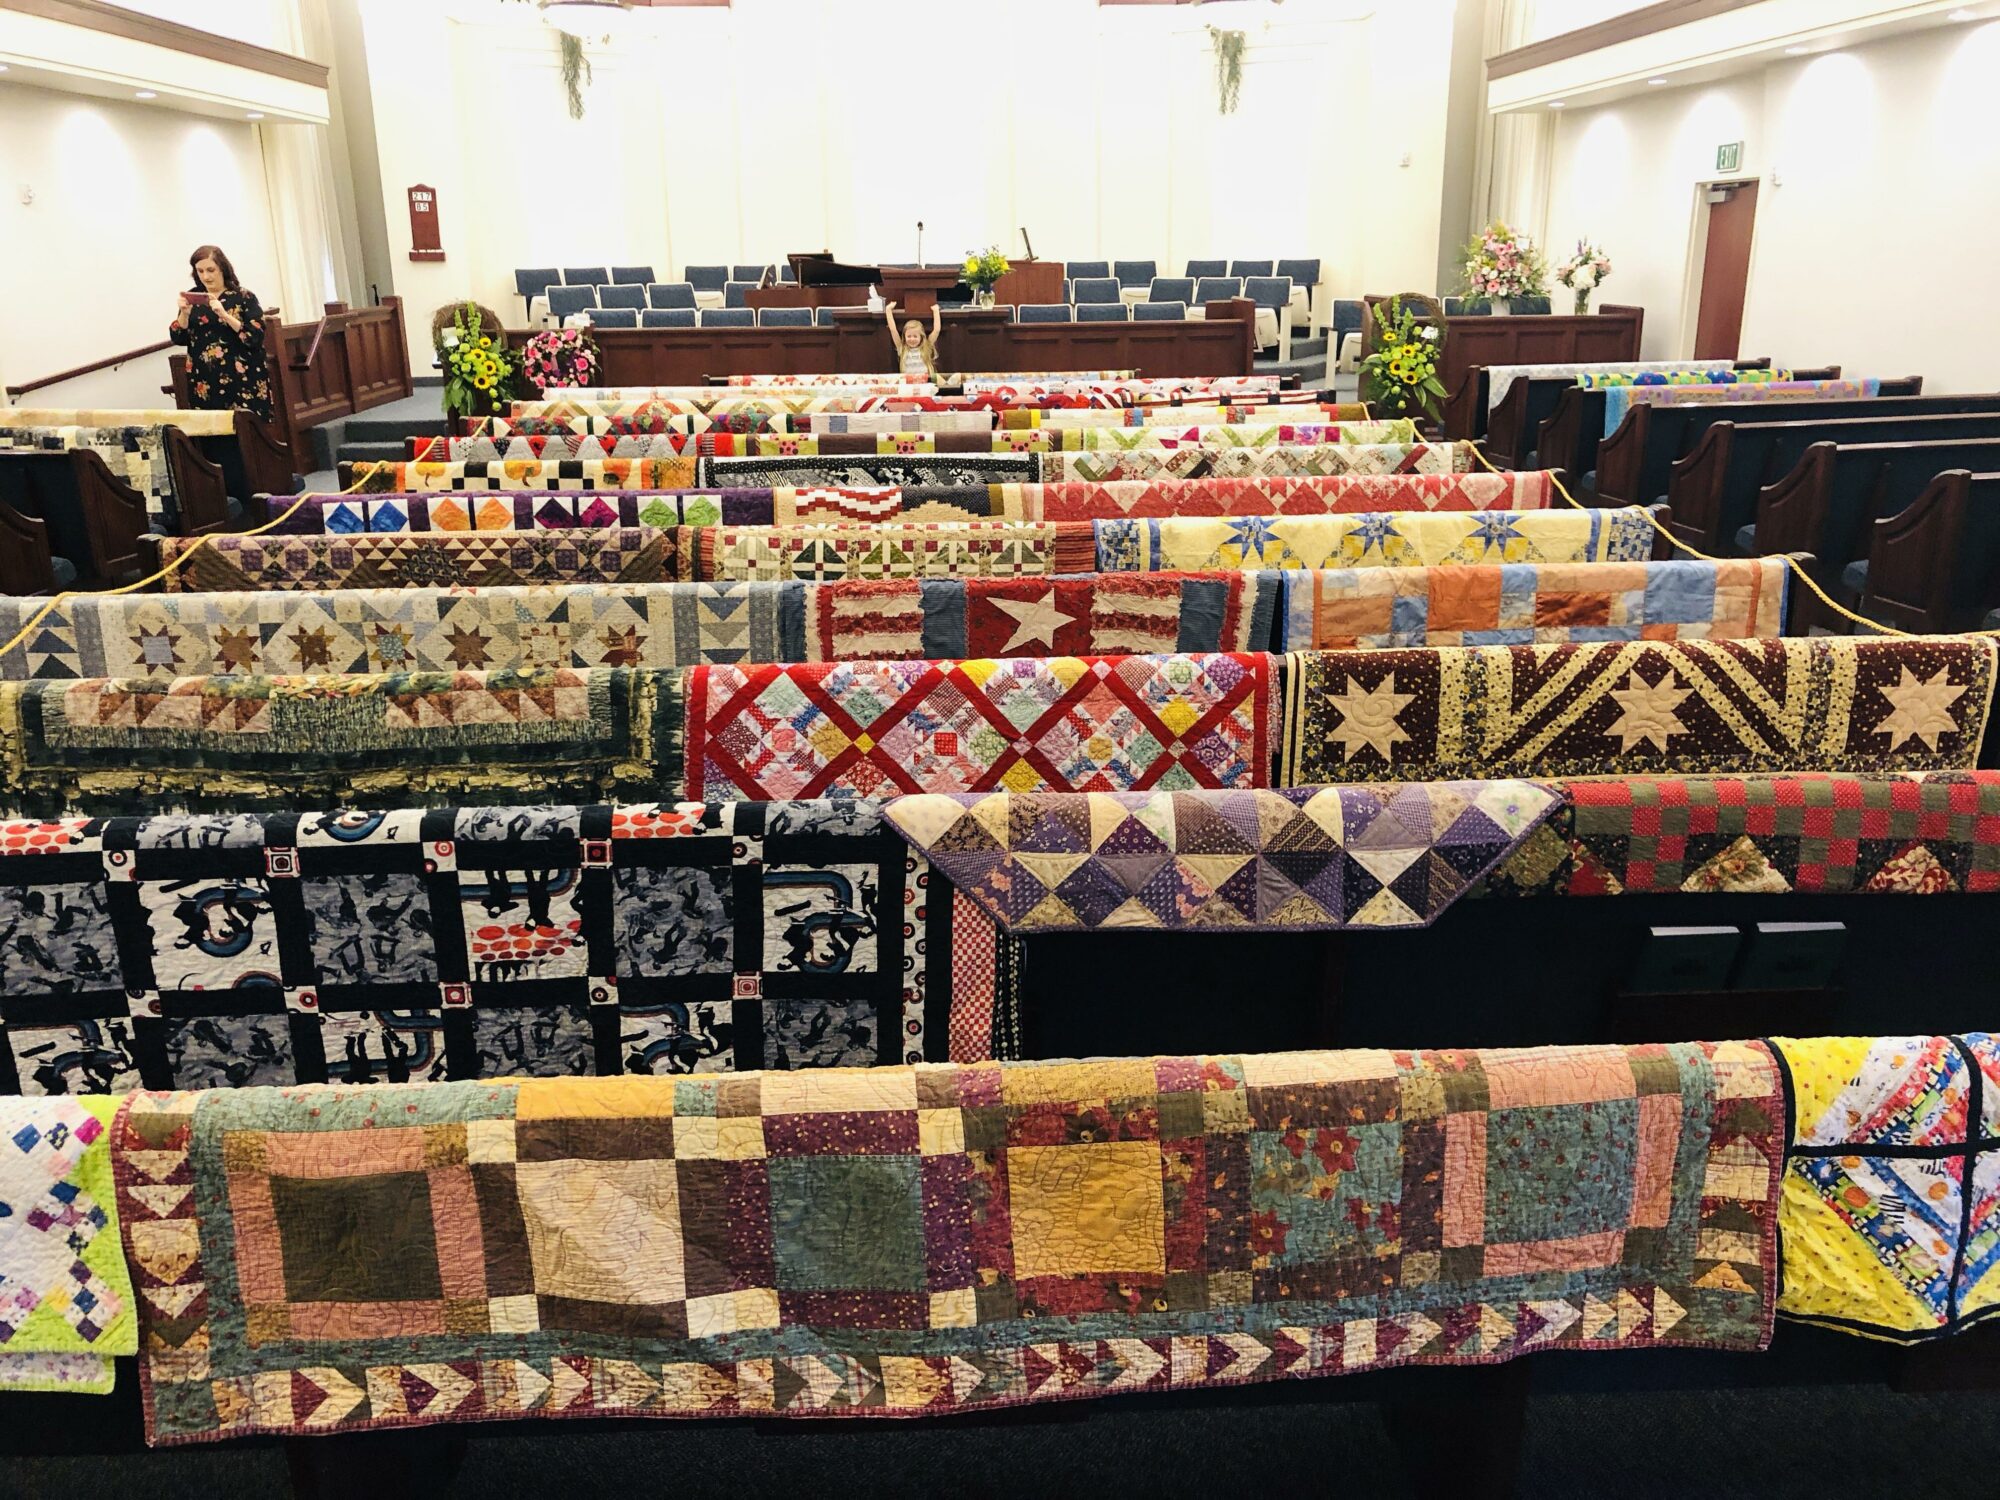 Unknown date and person - maybe 2019.  Quilts on Display at Funerals - What a great way to show off all the quilts a loved one made when they pass away. #quilts #quilting 